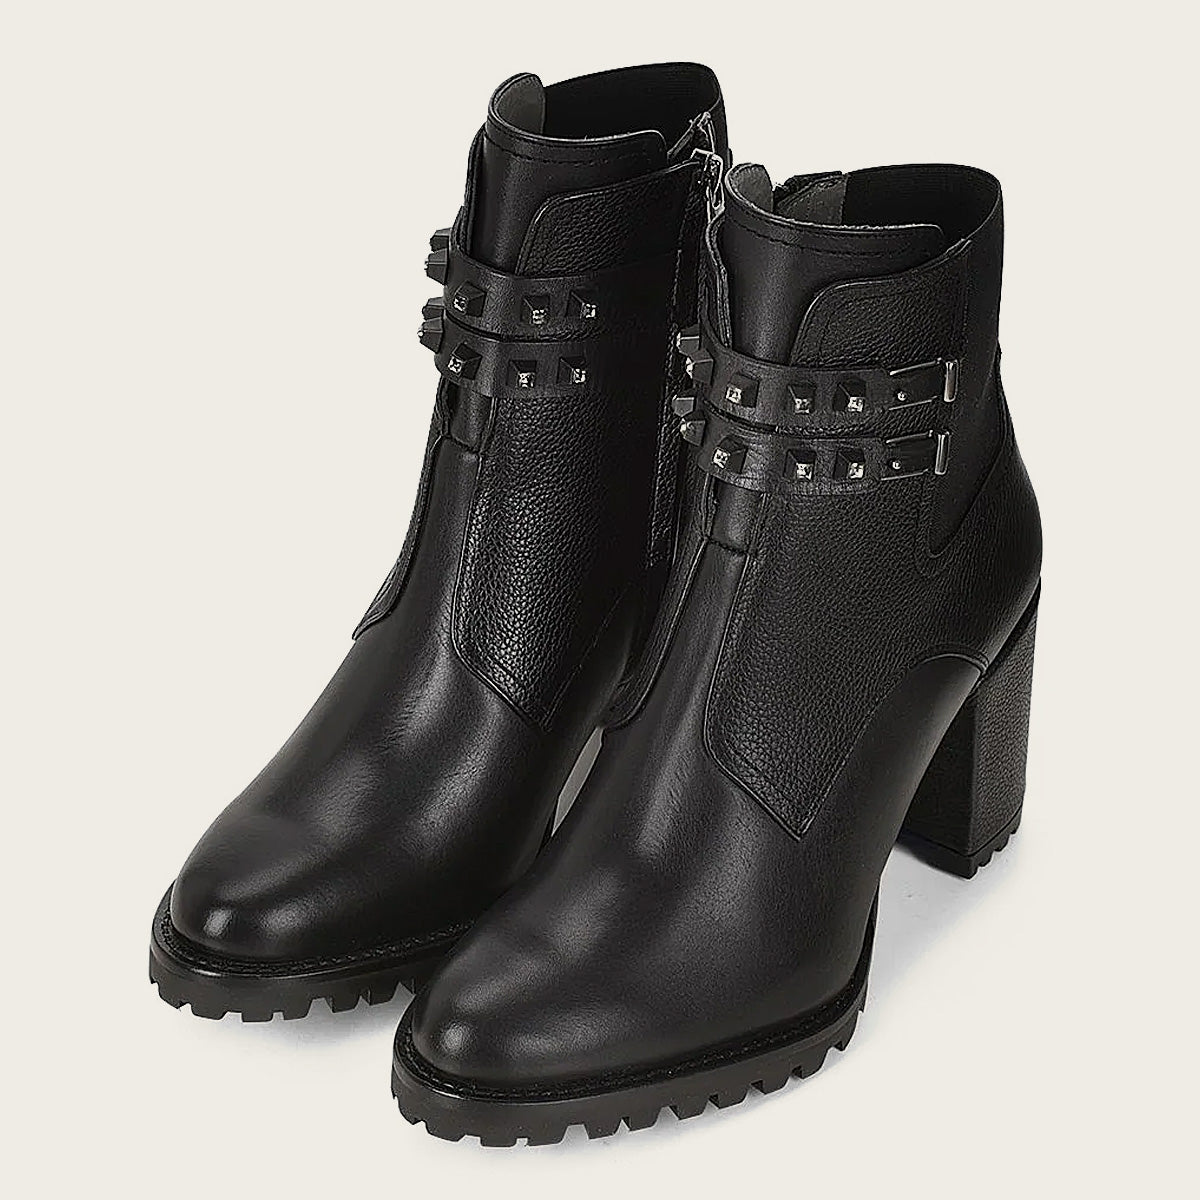 Our black combination leather urban ankle bootie effortlessly combines fashion and functionality..